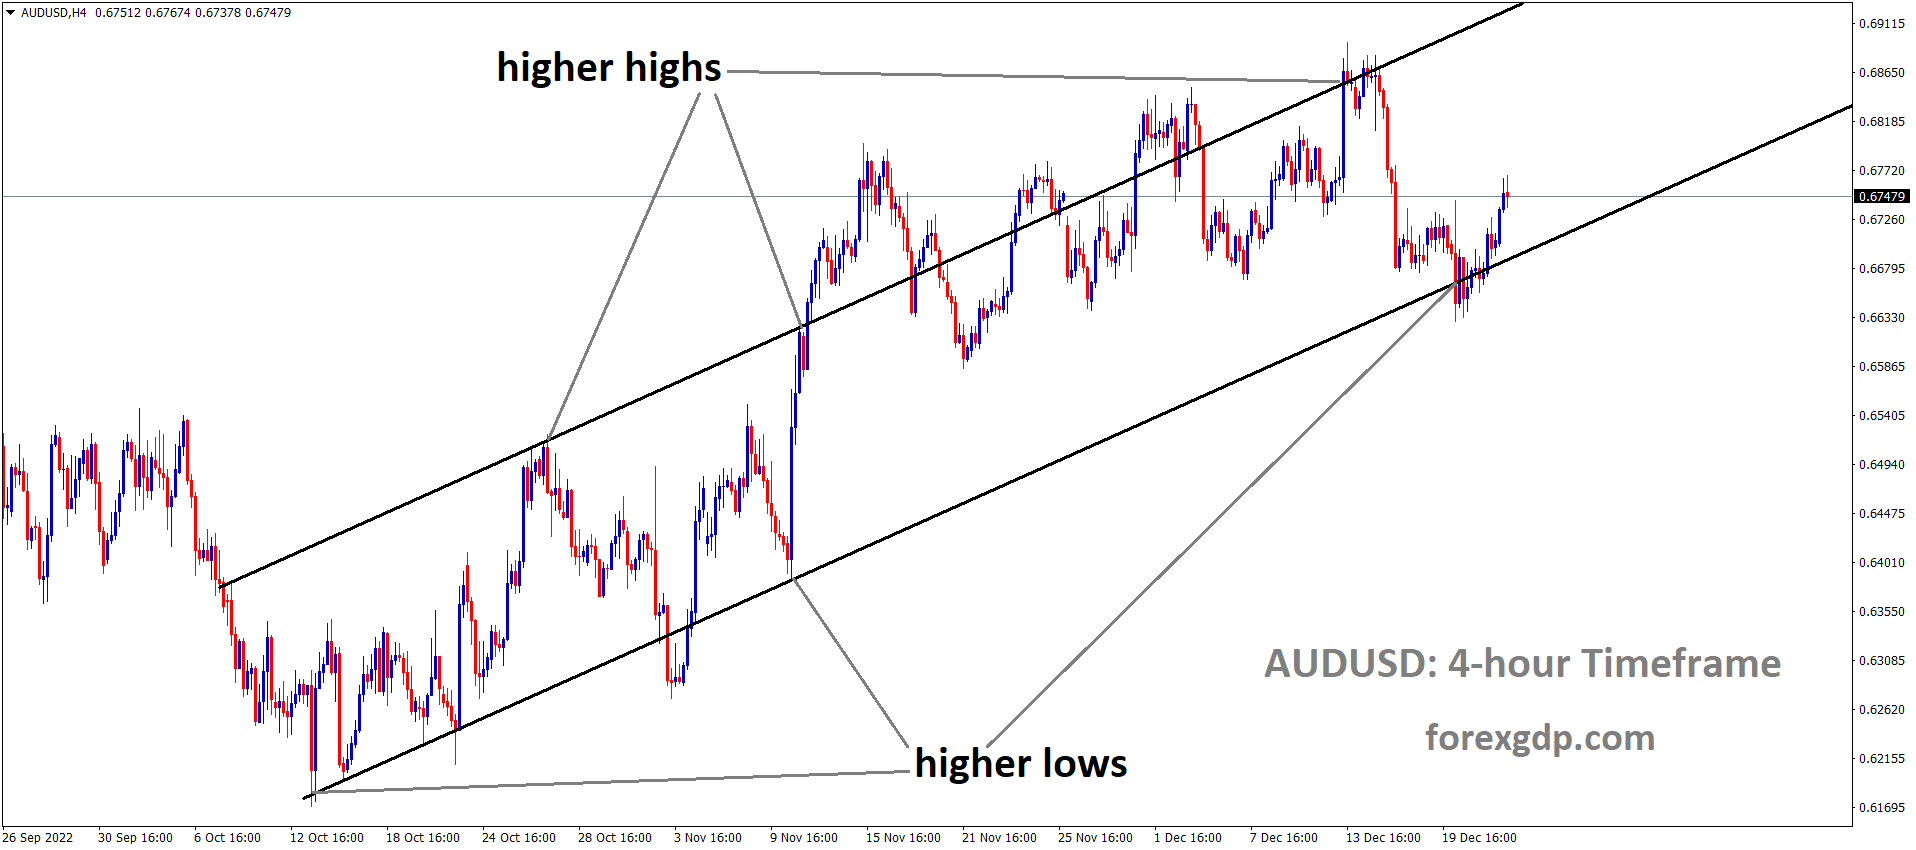 AUDUSD is moving in an Ascending channel and the market has rebounded from the higher low area of the channel